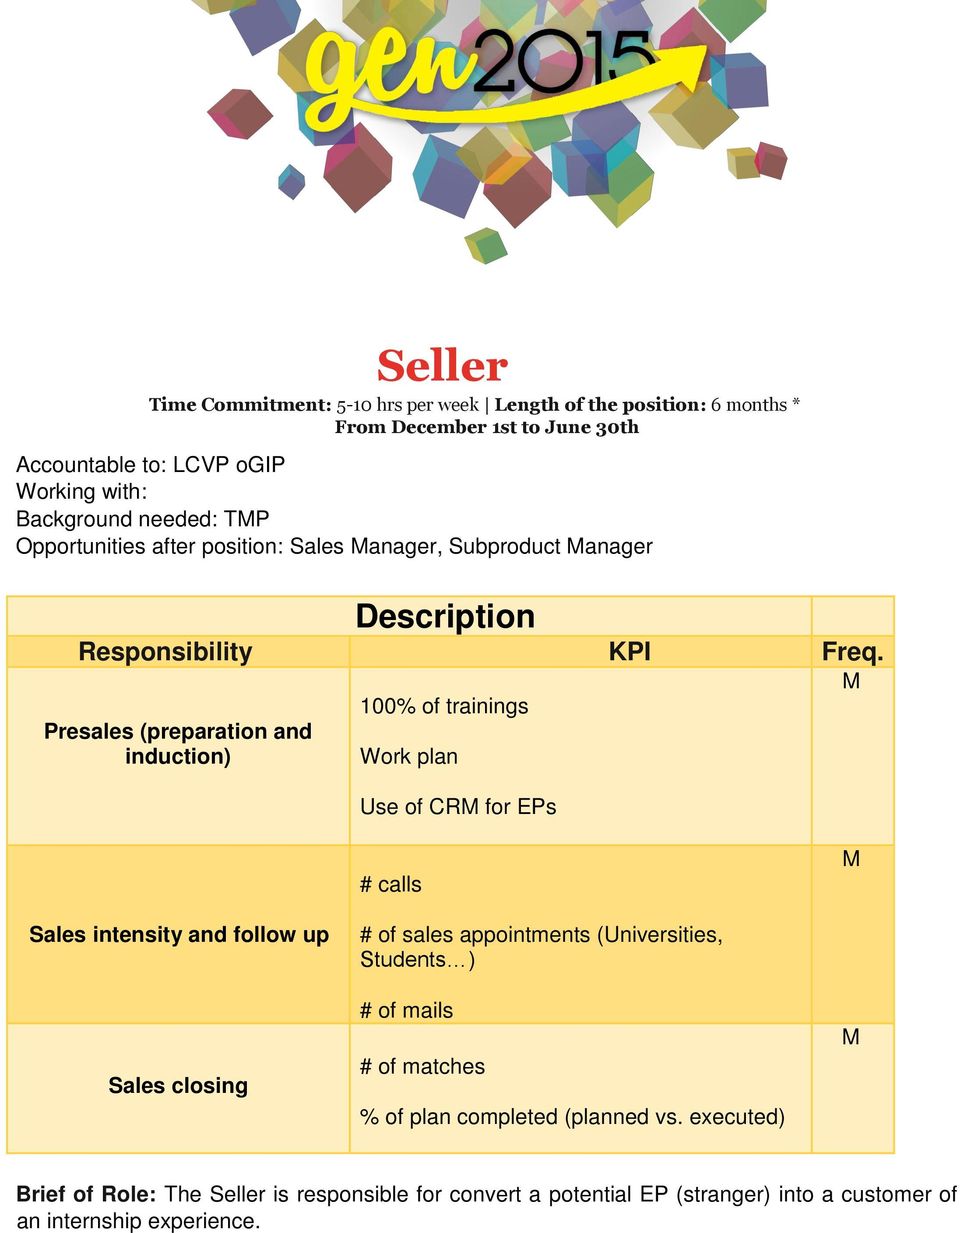 Presales (preparation and induction) 100% of trainings Work plan Use of CR for EPs # calls Sales intensity and follow up Sales closing # of sales appointments